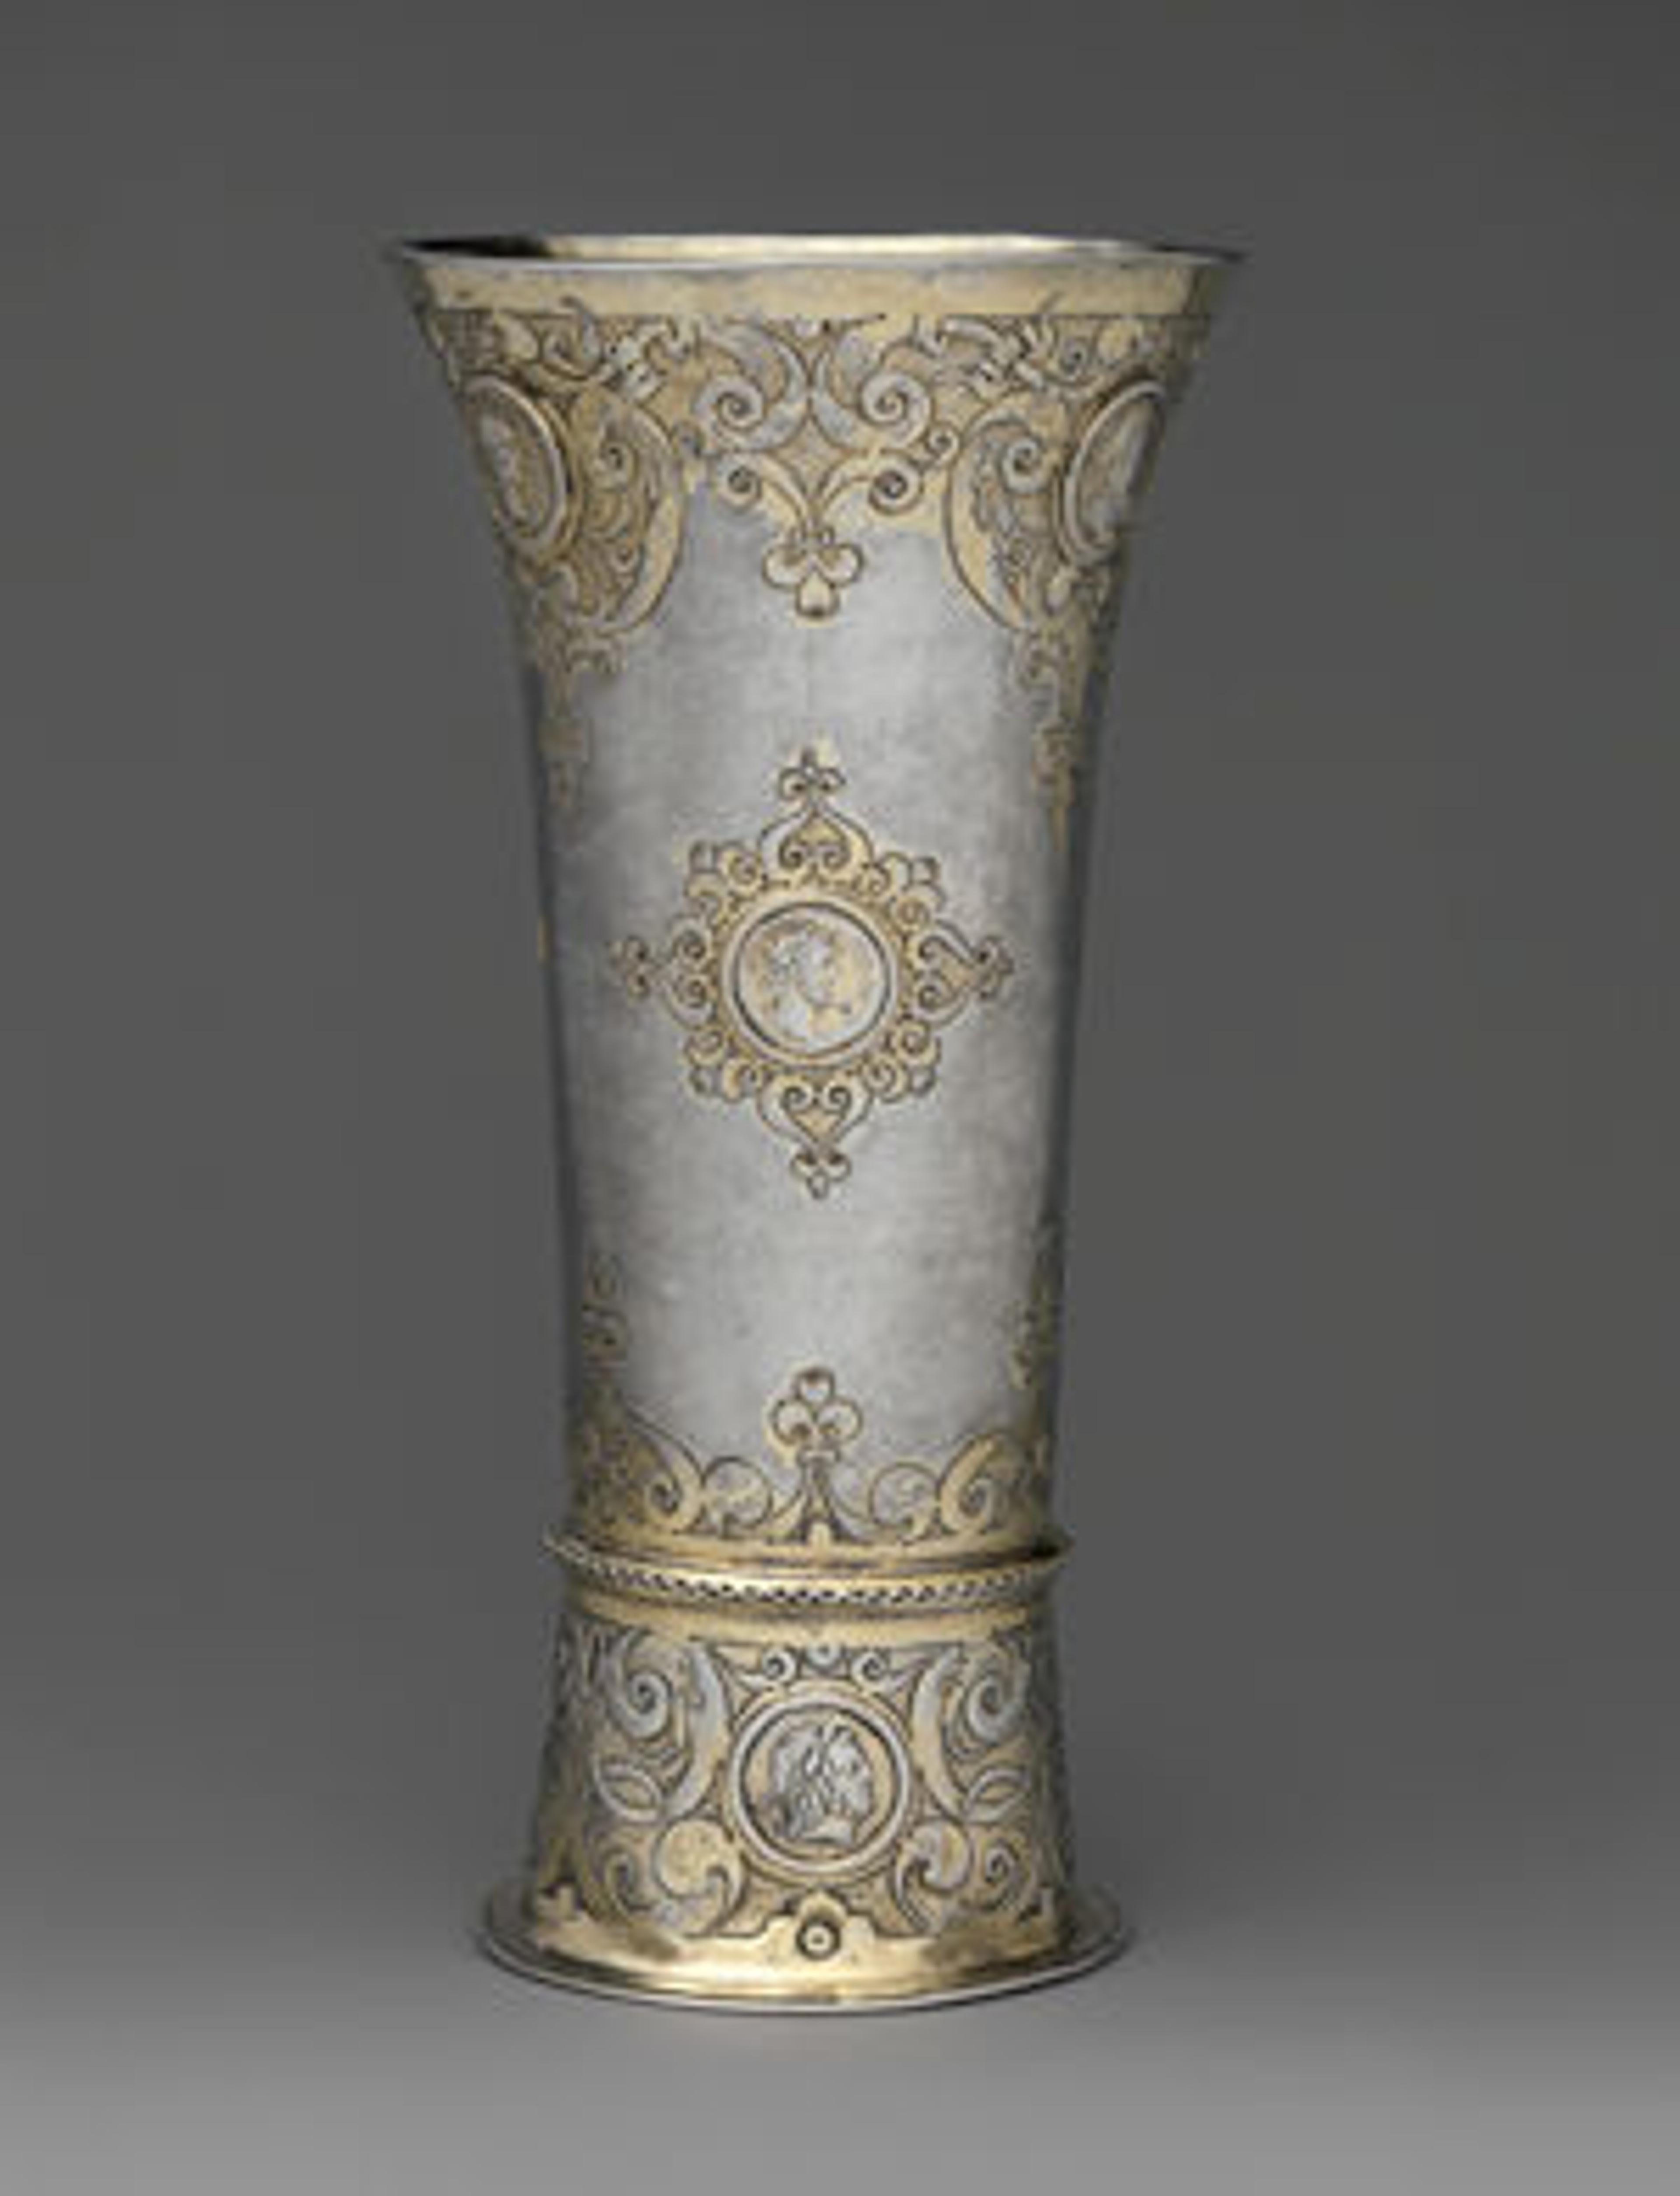 Petrus Schnell II (active ca. 1615–51). Footed beaker, ca. 1650. Hungarian, Nagyszeben. Silver, partly gilded; Overall: 7 11/16 x 3 7/8 in. (19.5 x 9.8 cm). The Metropolitan Museum of Art, New York, Gift of The Salgo Trust for Education, New York, in memory of Nicolas M. Salgo, 2010 (2010.110.25)